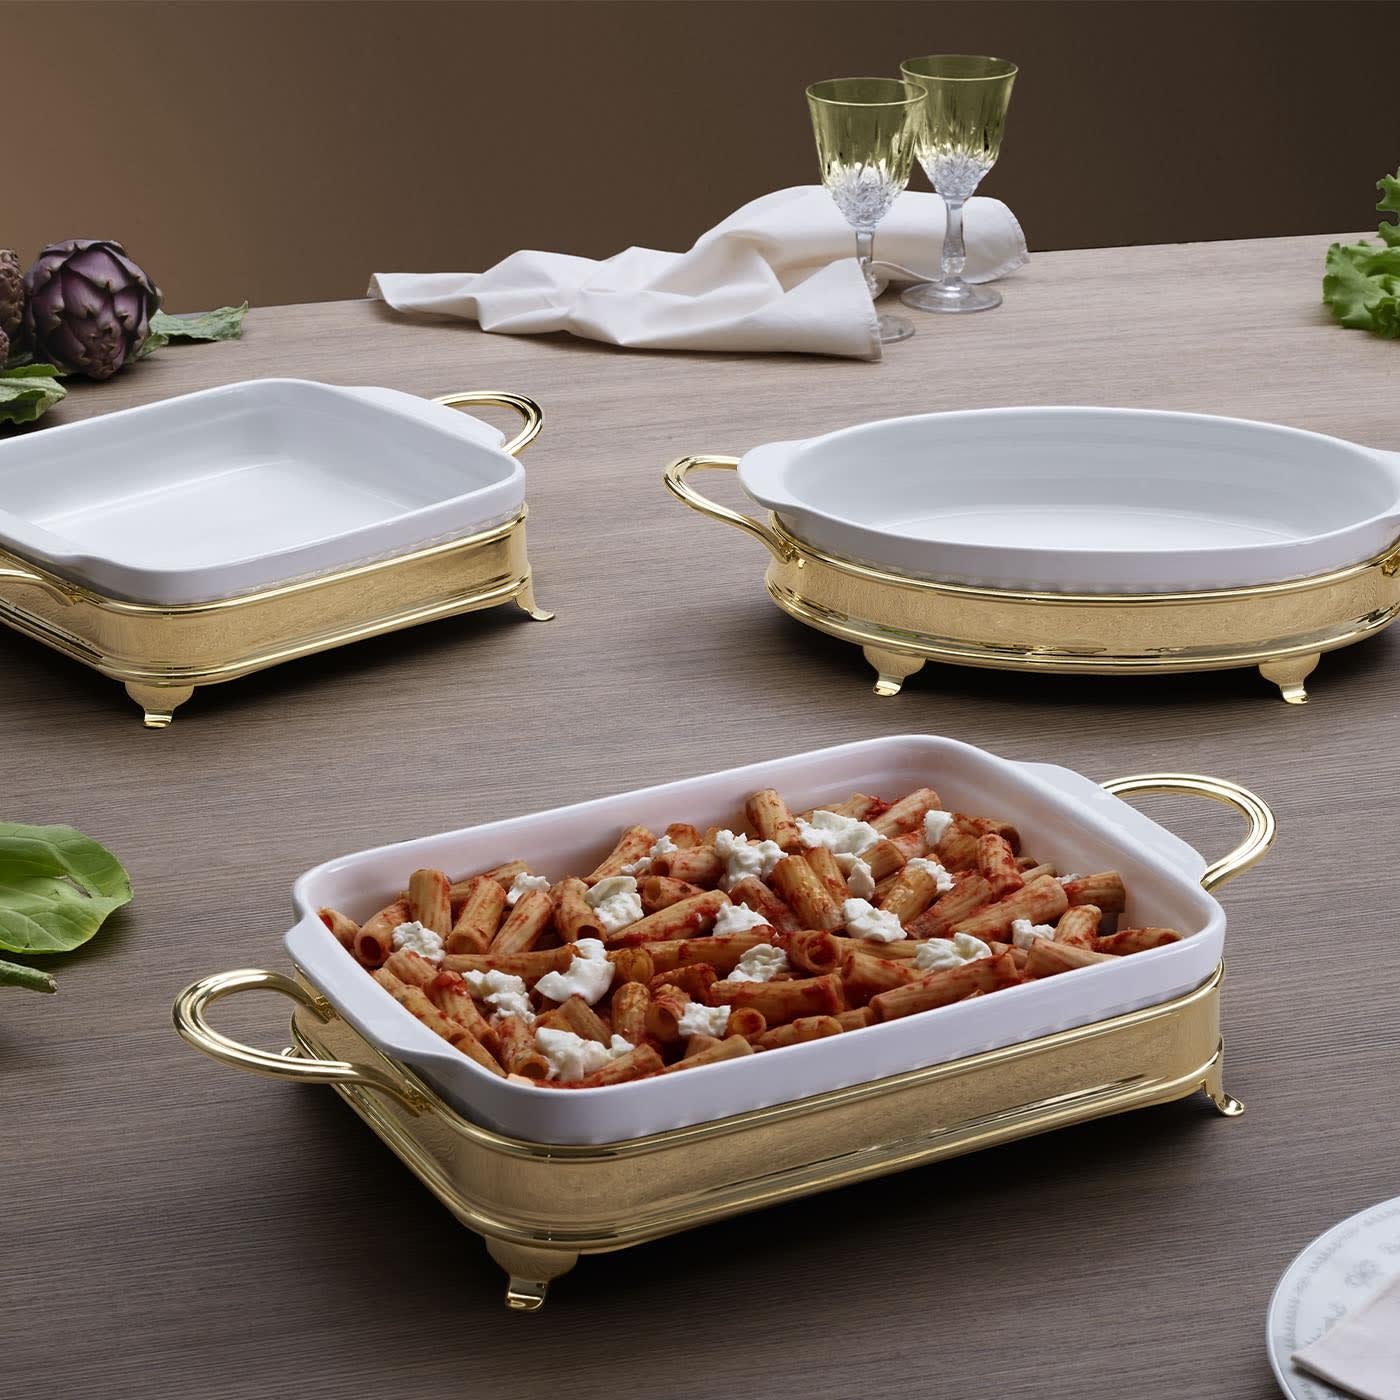 This superb set comprised a white ceramic baking dish and its holder was designed for serving hot food without compromising on refinement or luxury. Fashioned of brass and offered in a gleaming golden finish, the holder features two practical